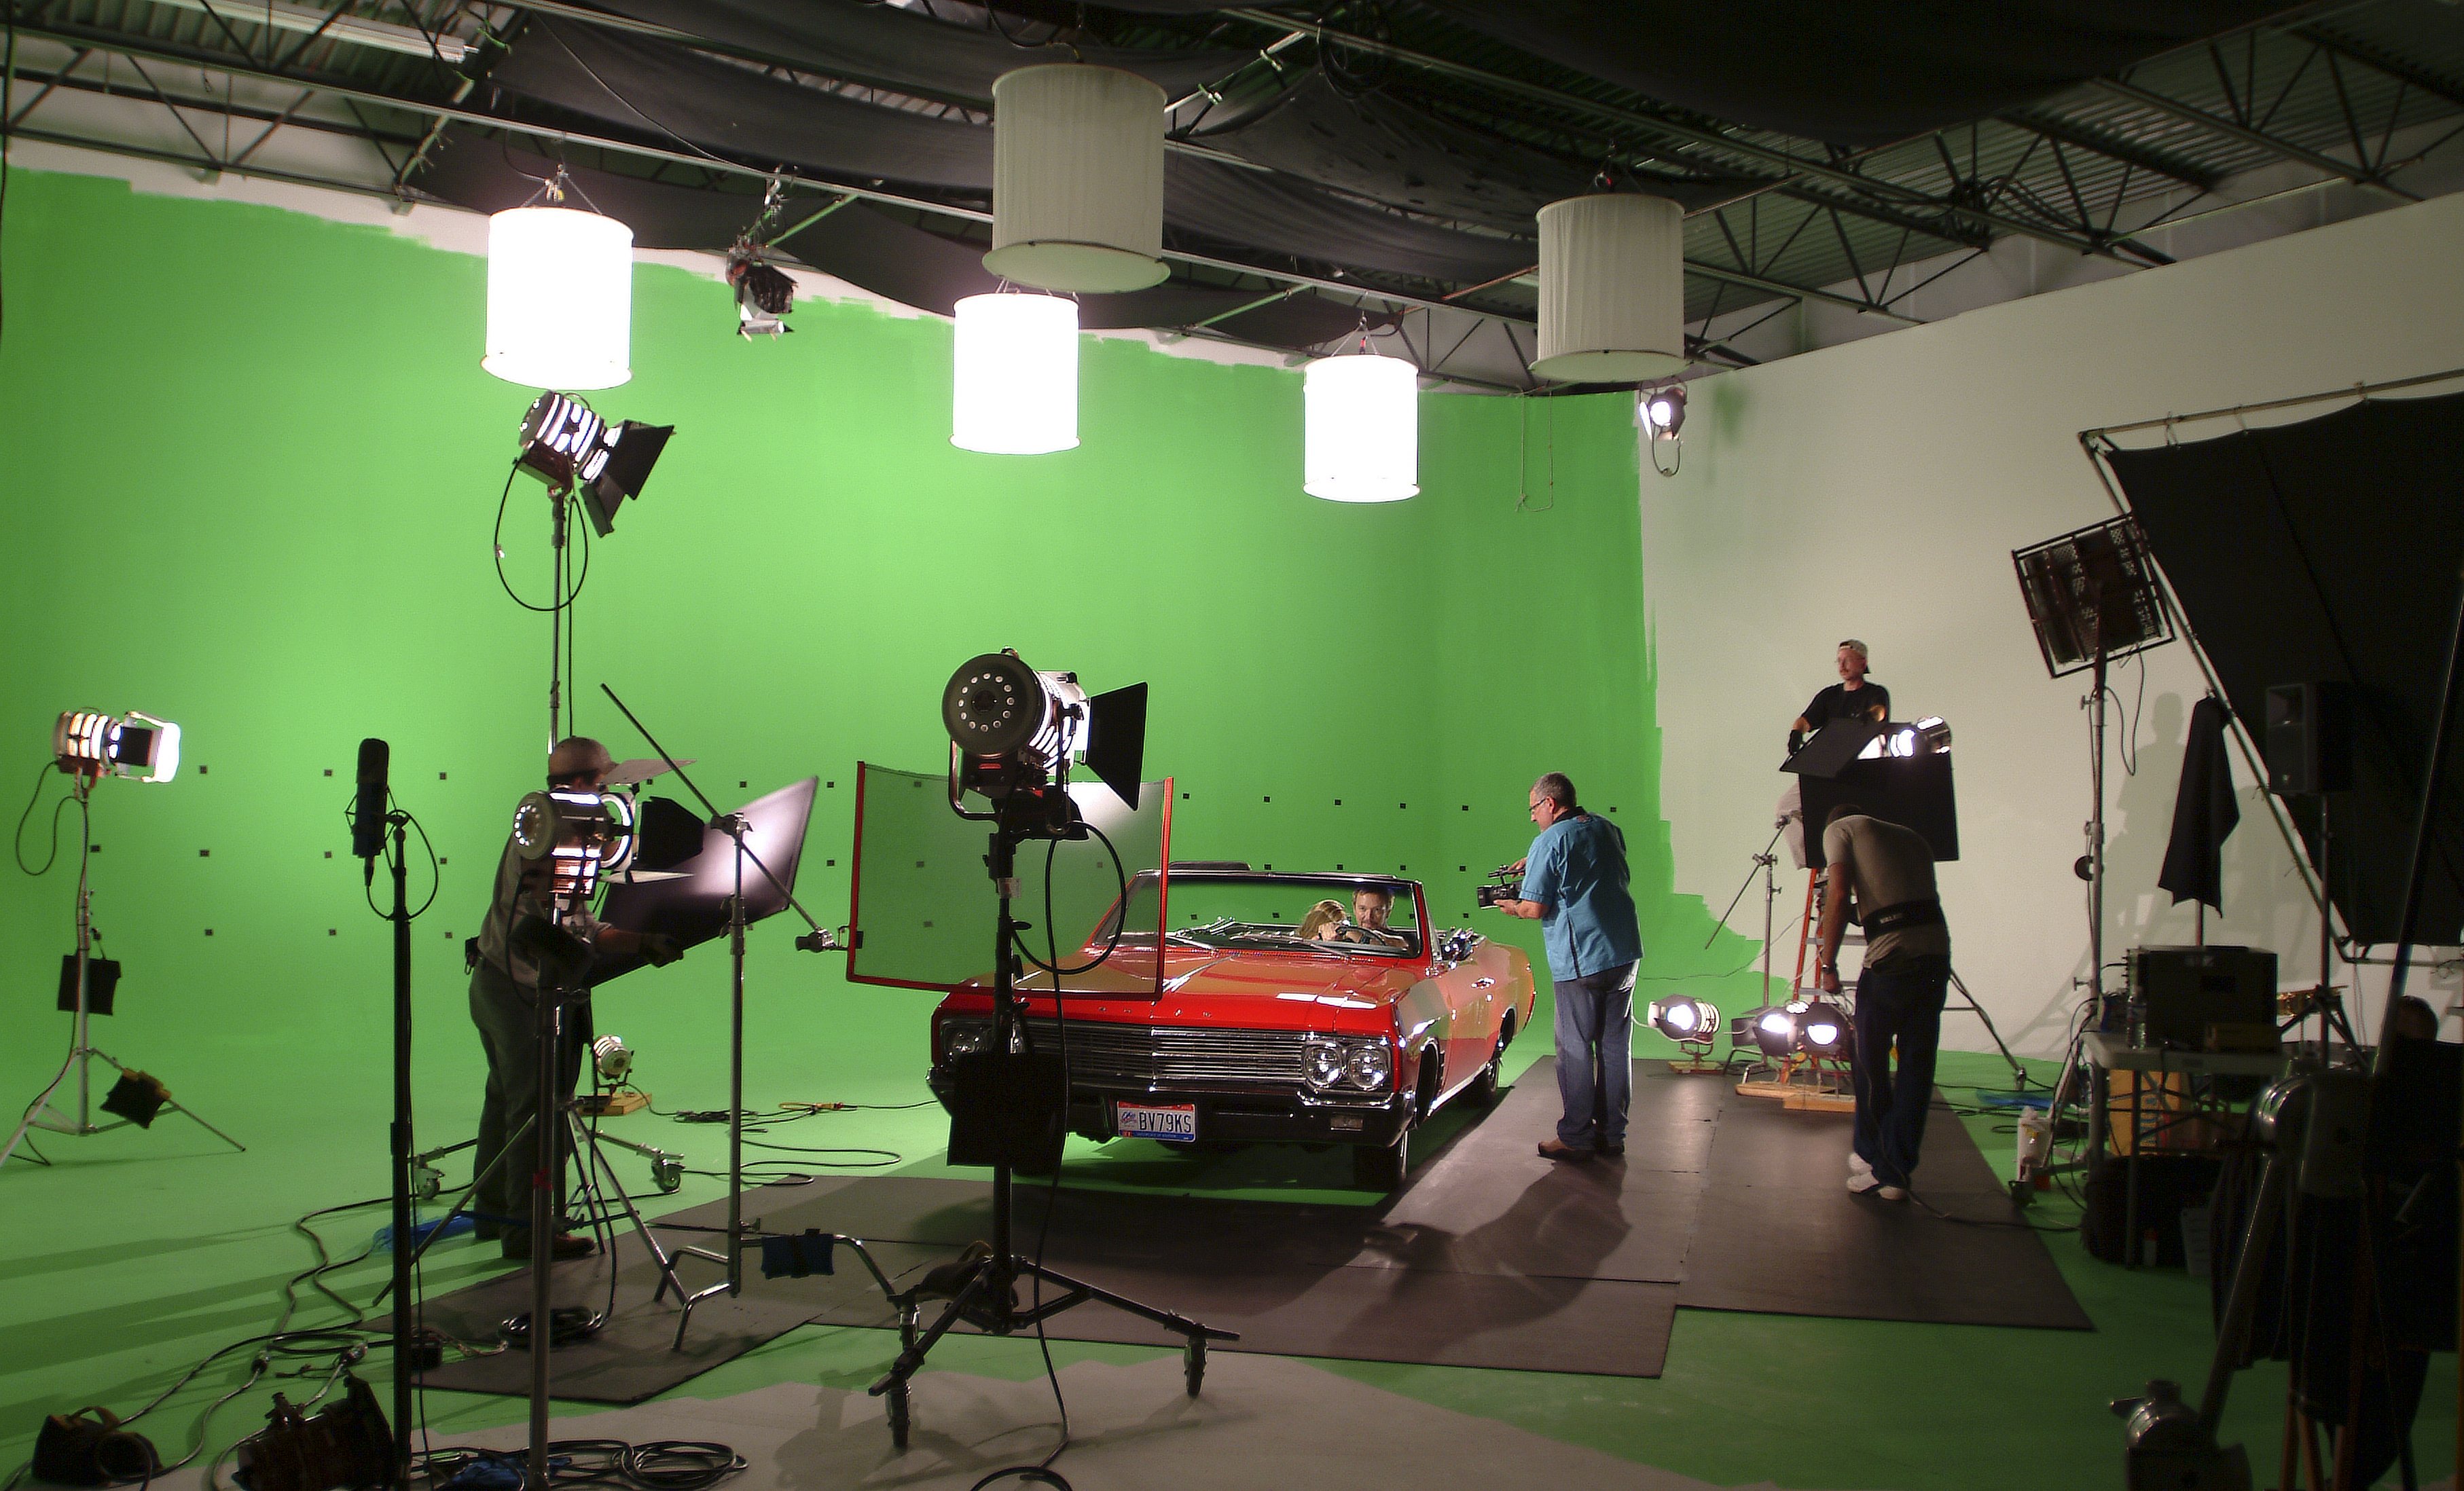 Michael Caporale directs a music video shot on greenscreen